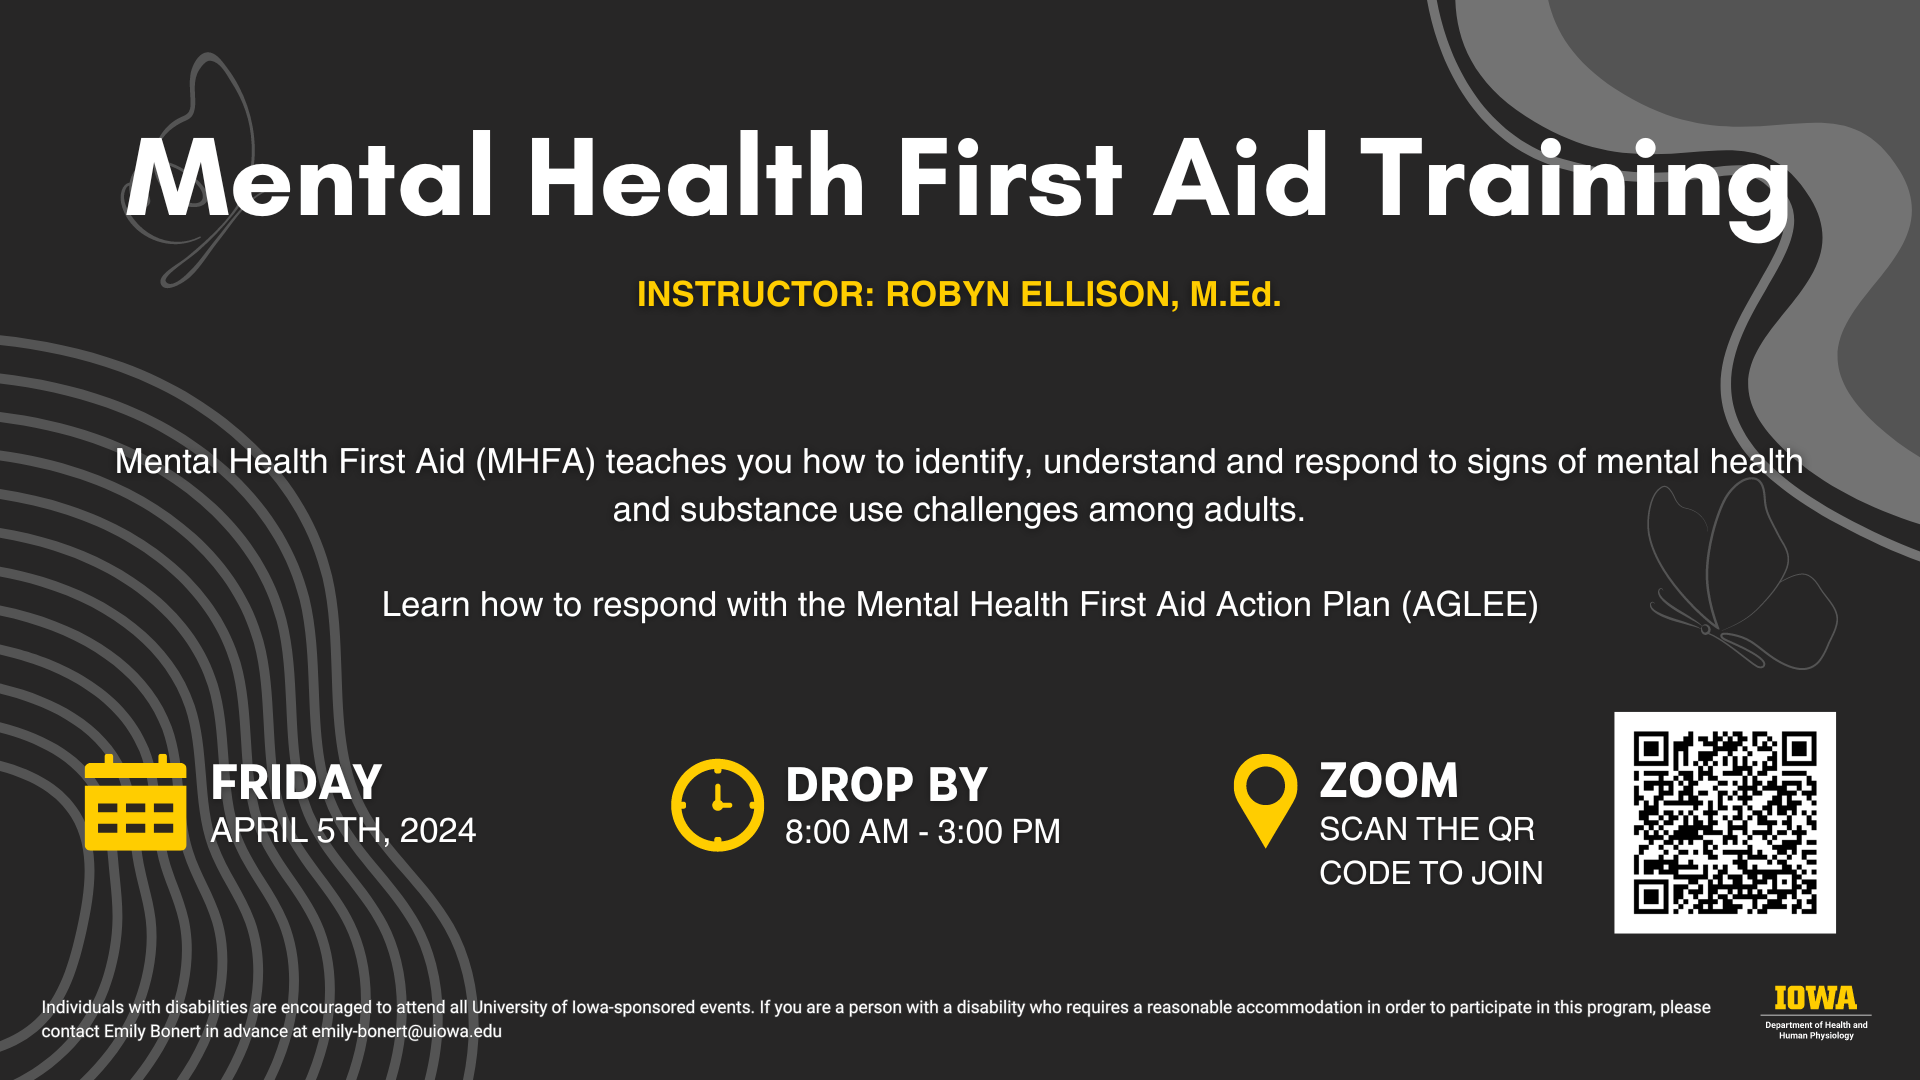 Mental Health First Aid (MHFA) teaches you how to identify, understand and respond to signs of mental health and substance use challenges among adults.